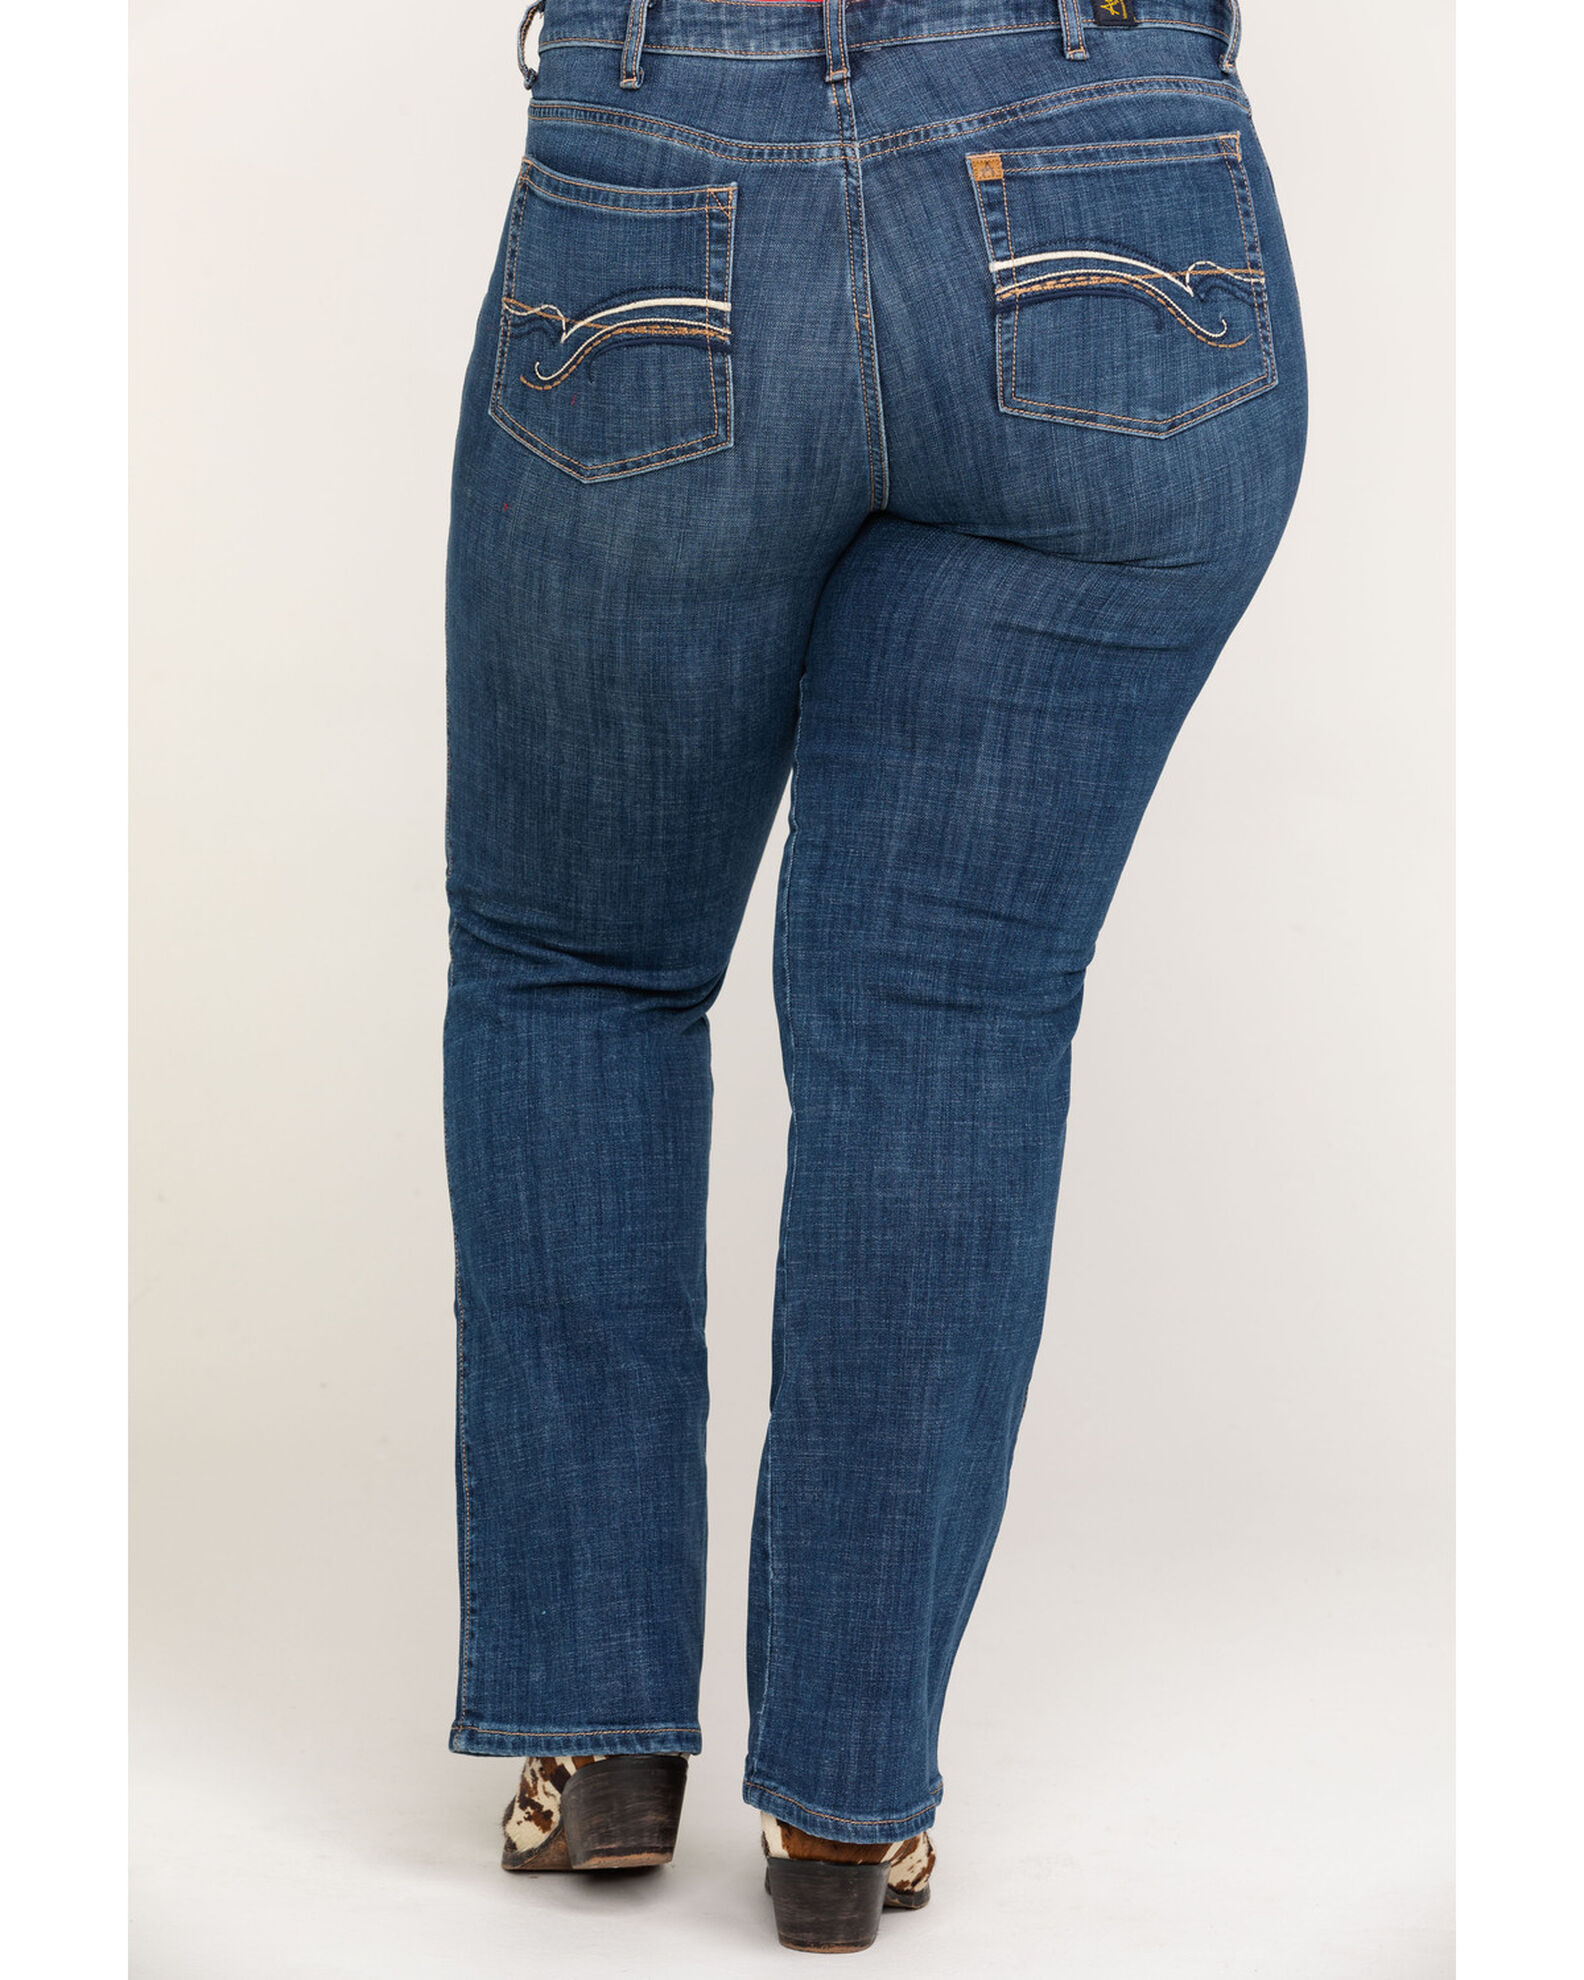 Wrangler Women's Aura Instantly Slimming Jeans - Plus - Country Outfitter